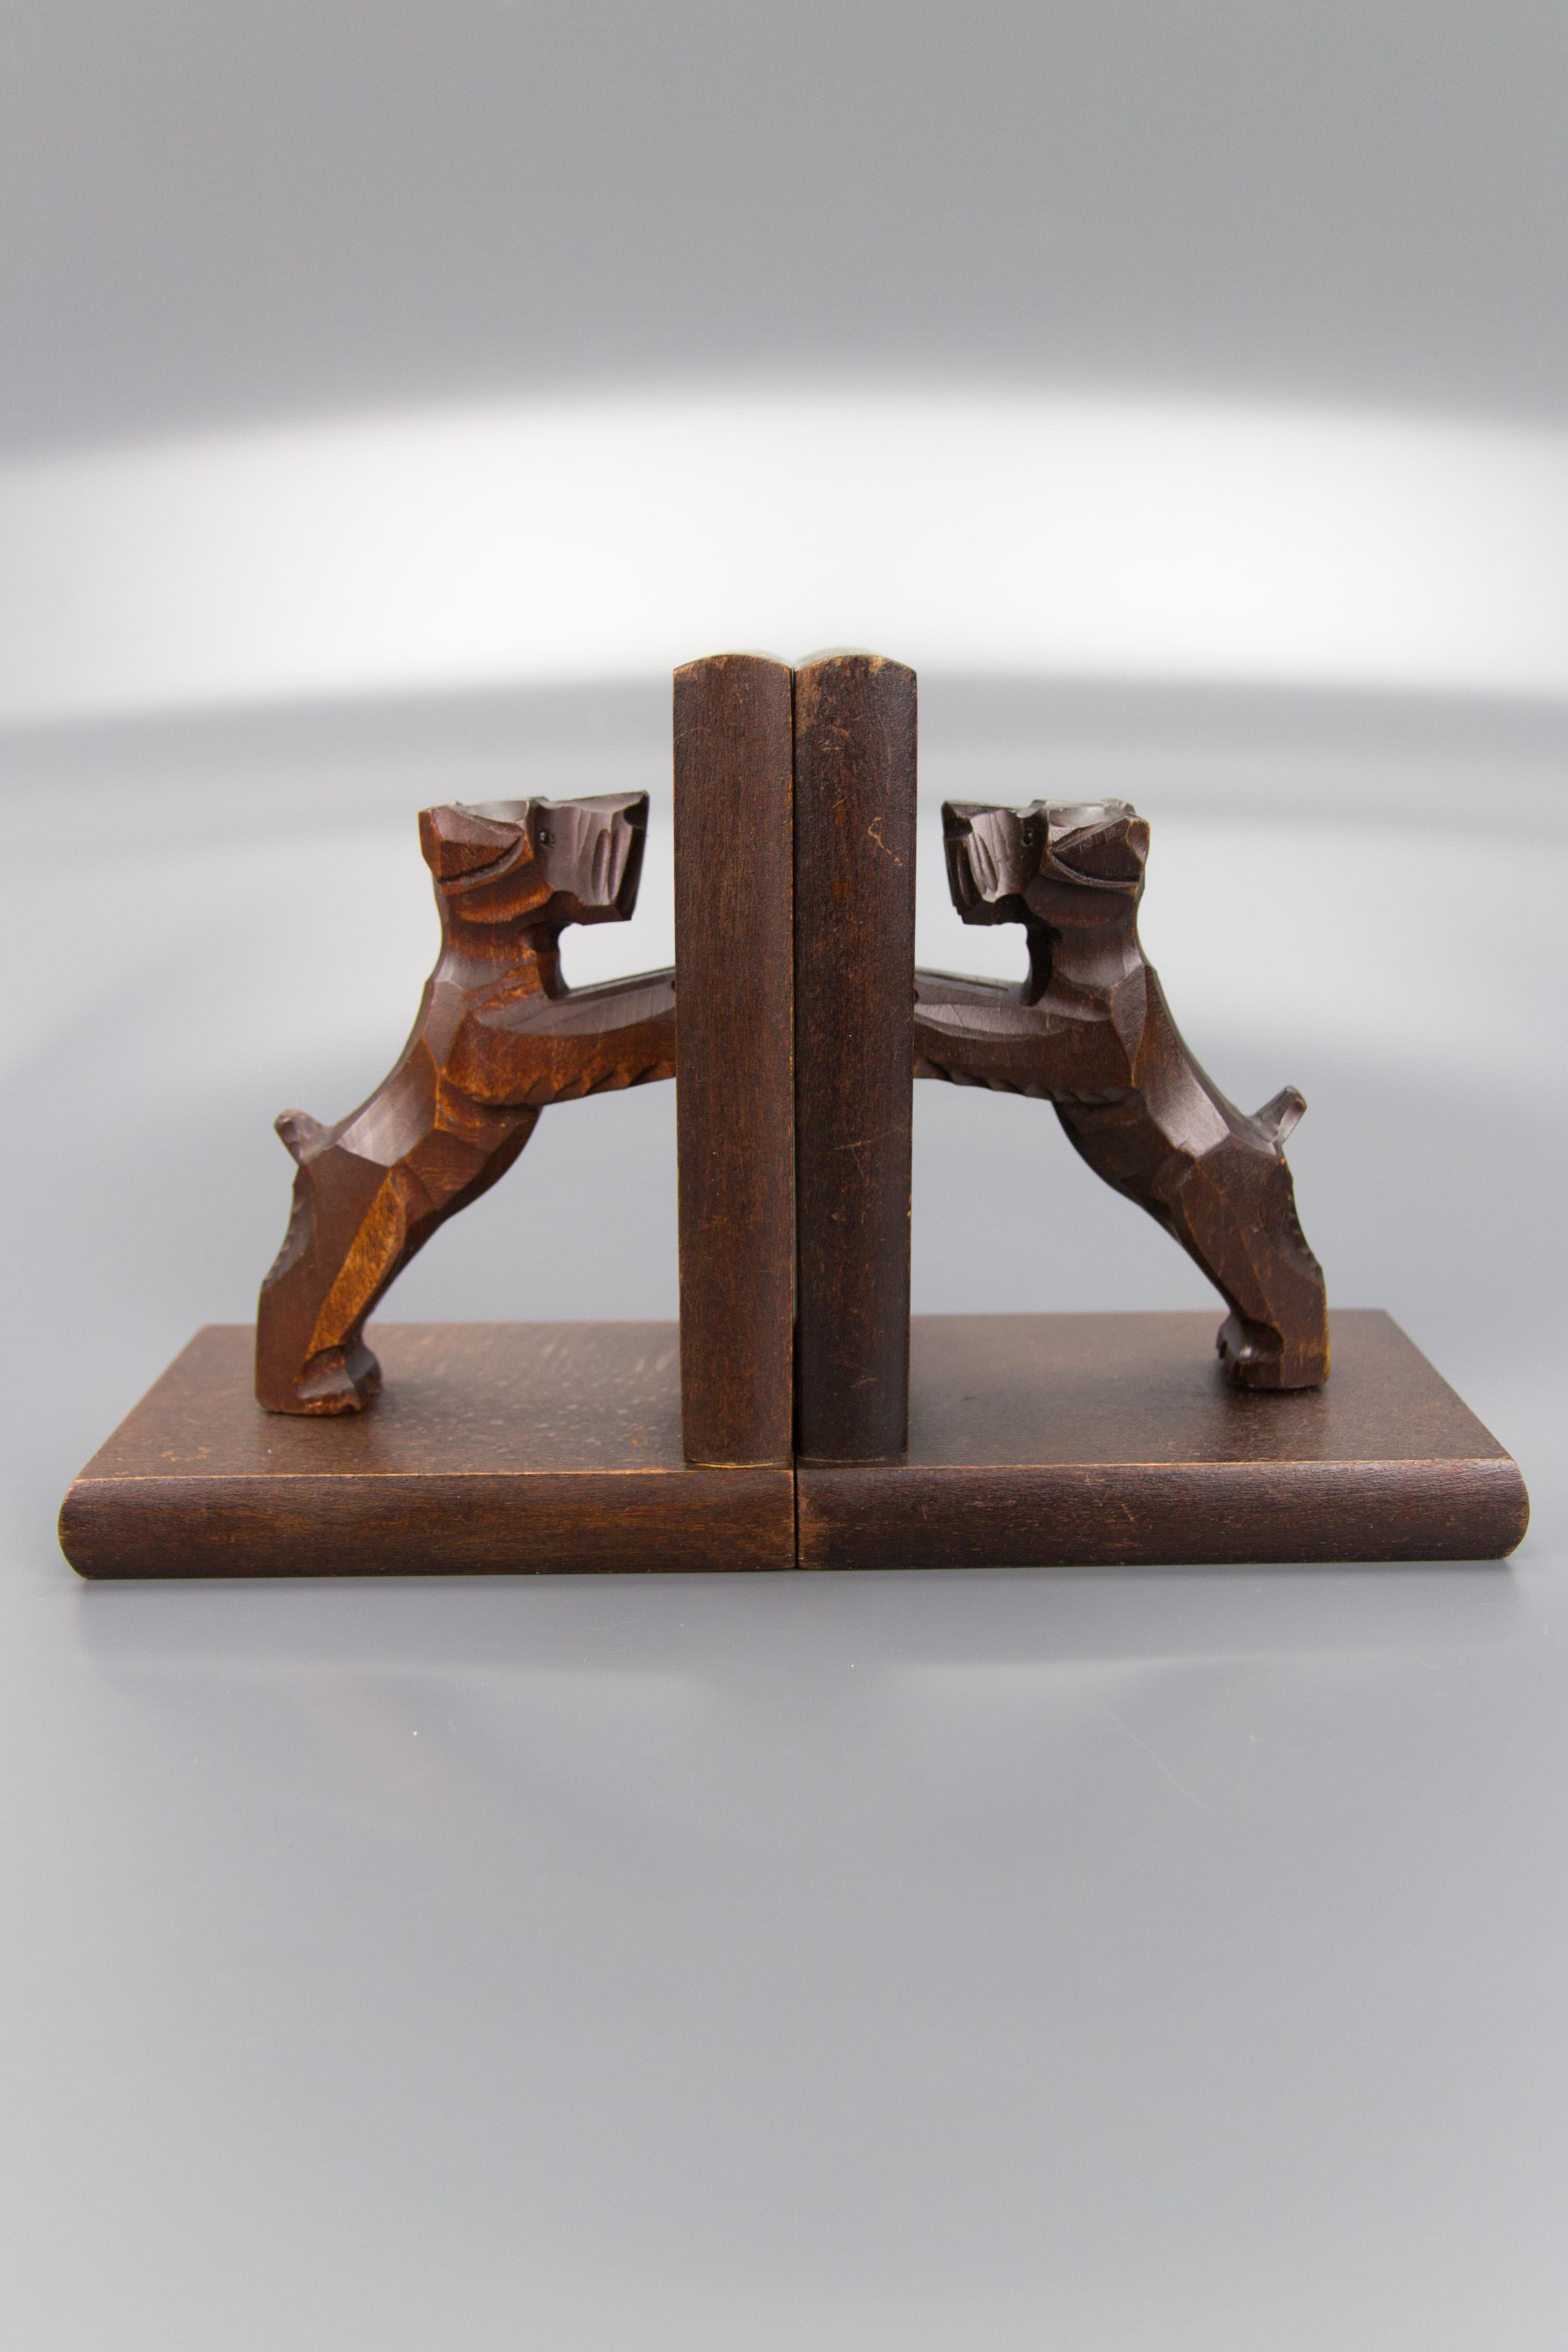 Hand Carved Terrier Wooden Bookends by Dörsch Oberweid, Germany 14